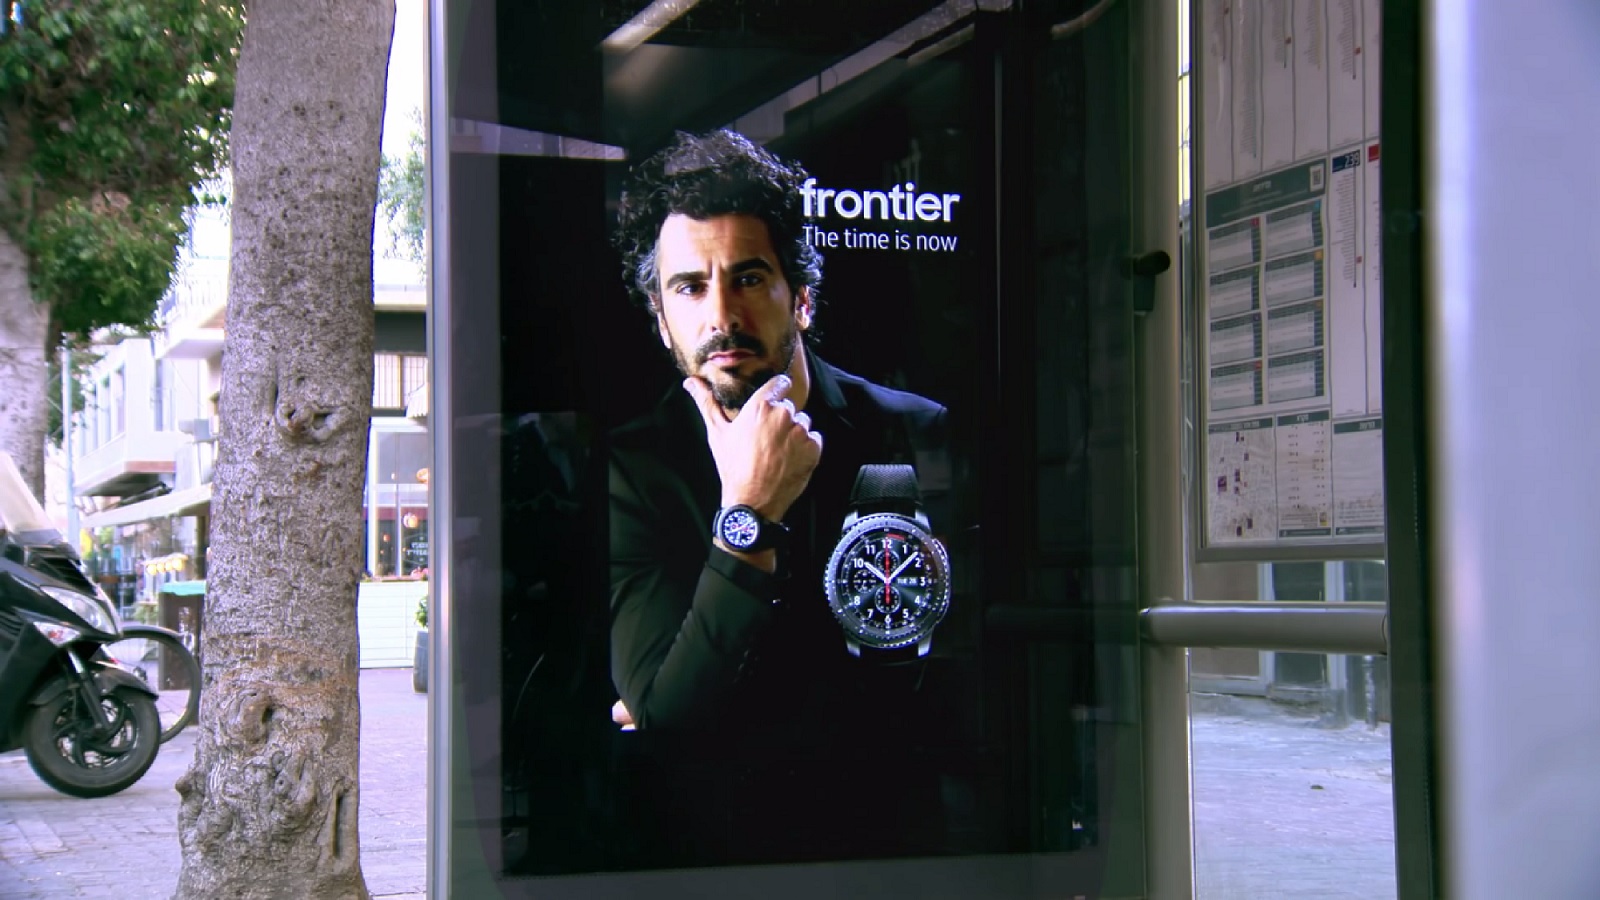 Samsung Redefines Its New Gear S3 Smartwatch with a Cheeky Poster